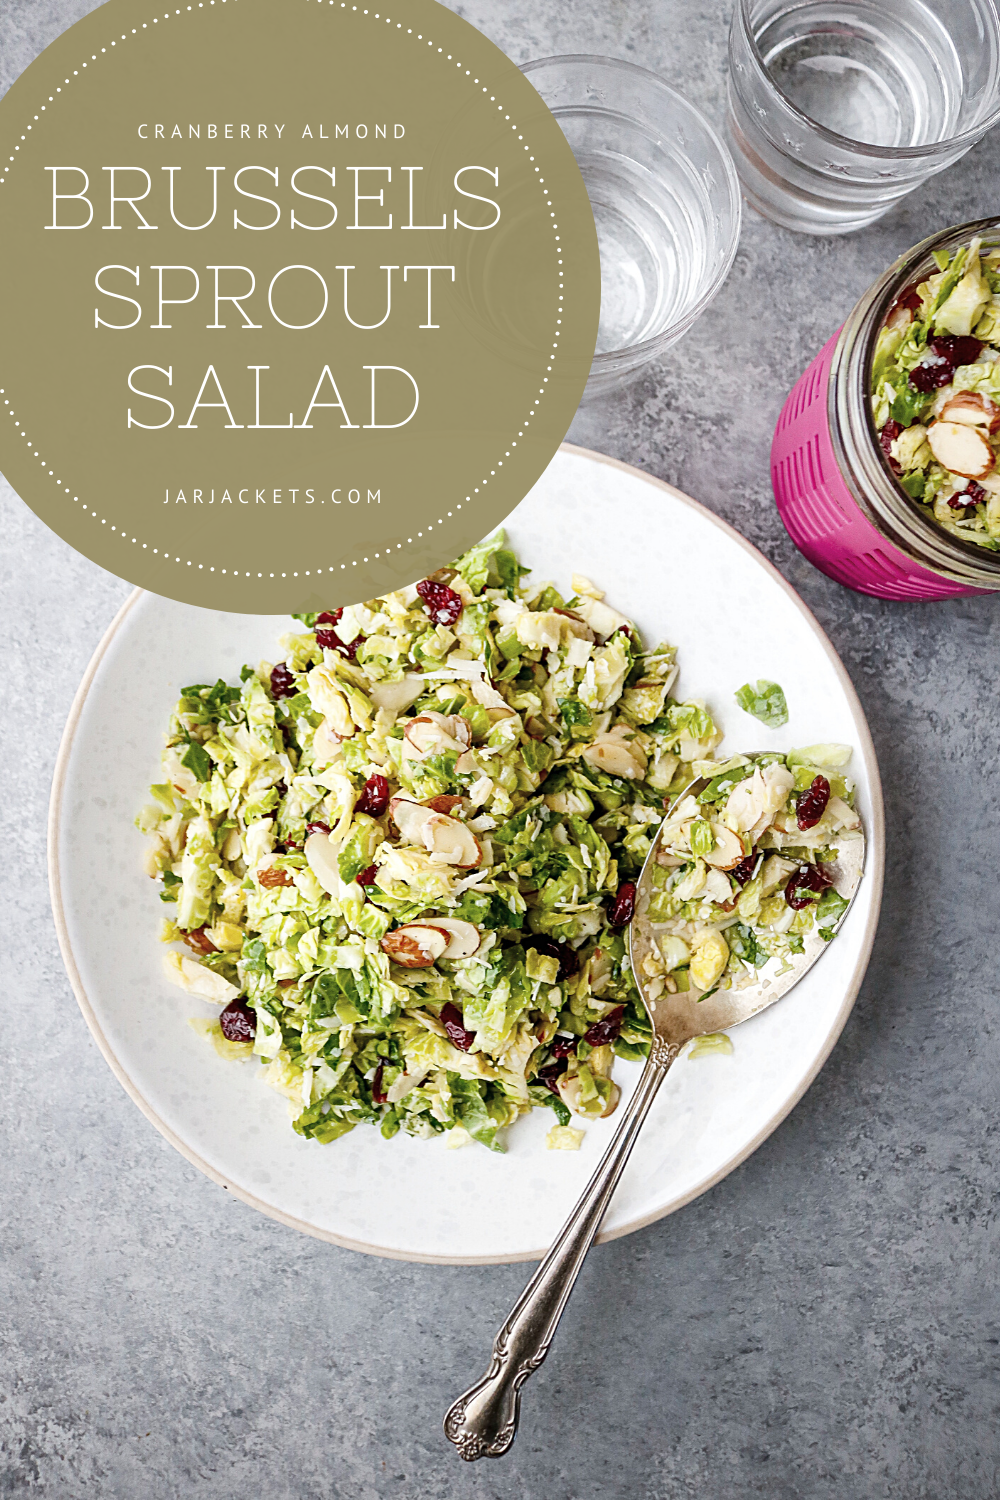 Cranberry Almond Brussels Sprout Salad